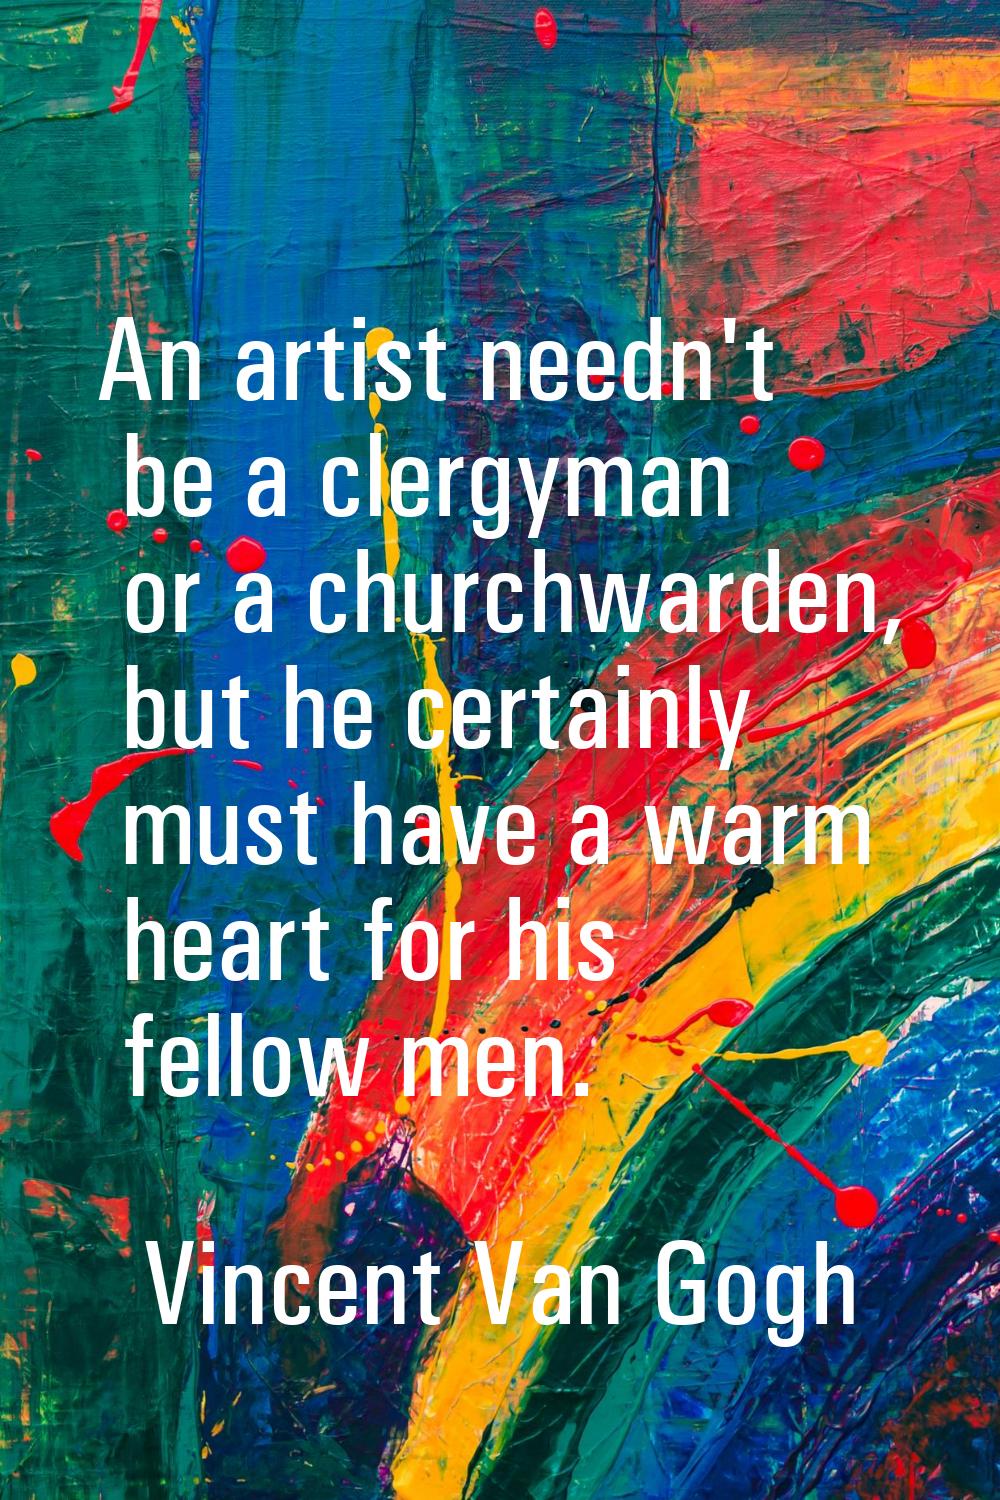 An artist needn't be a clergyman or a churchwarden, but he certainly must have a warm heart for his